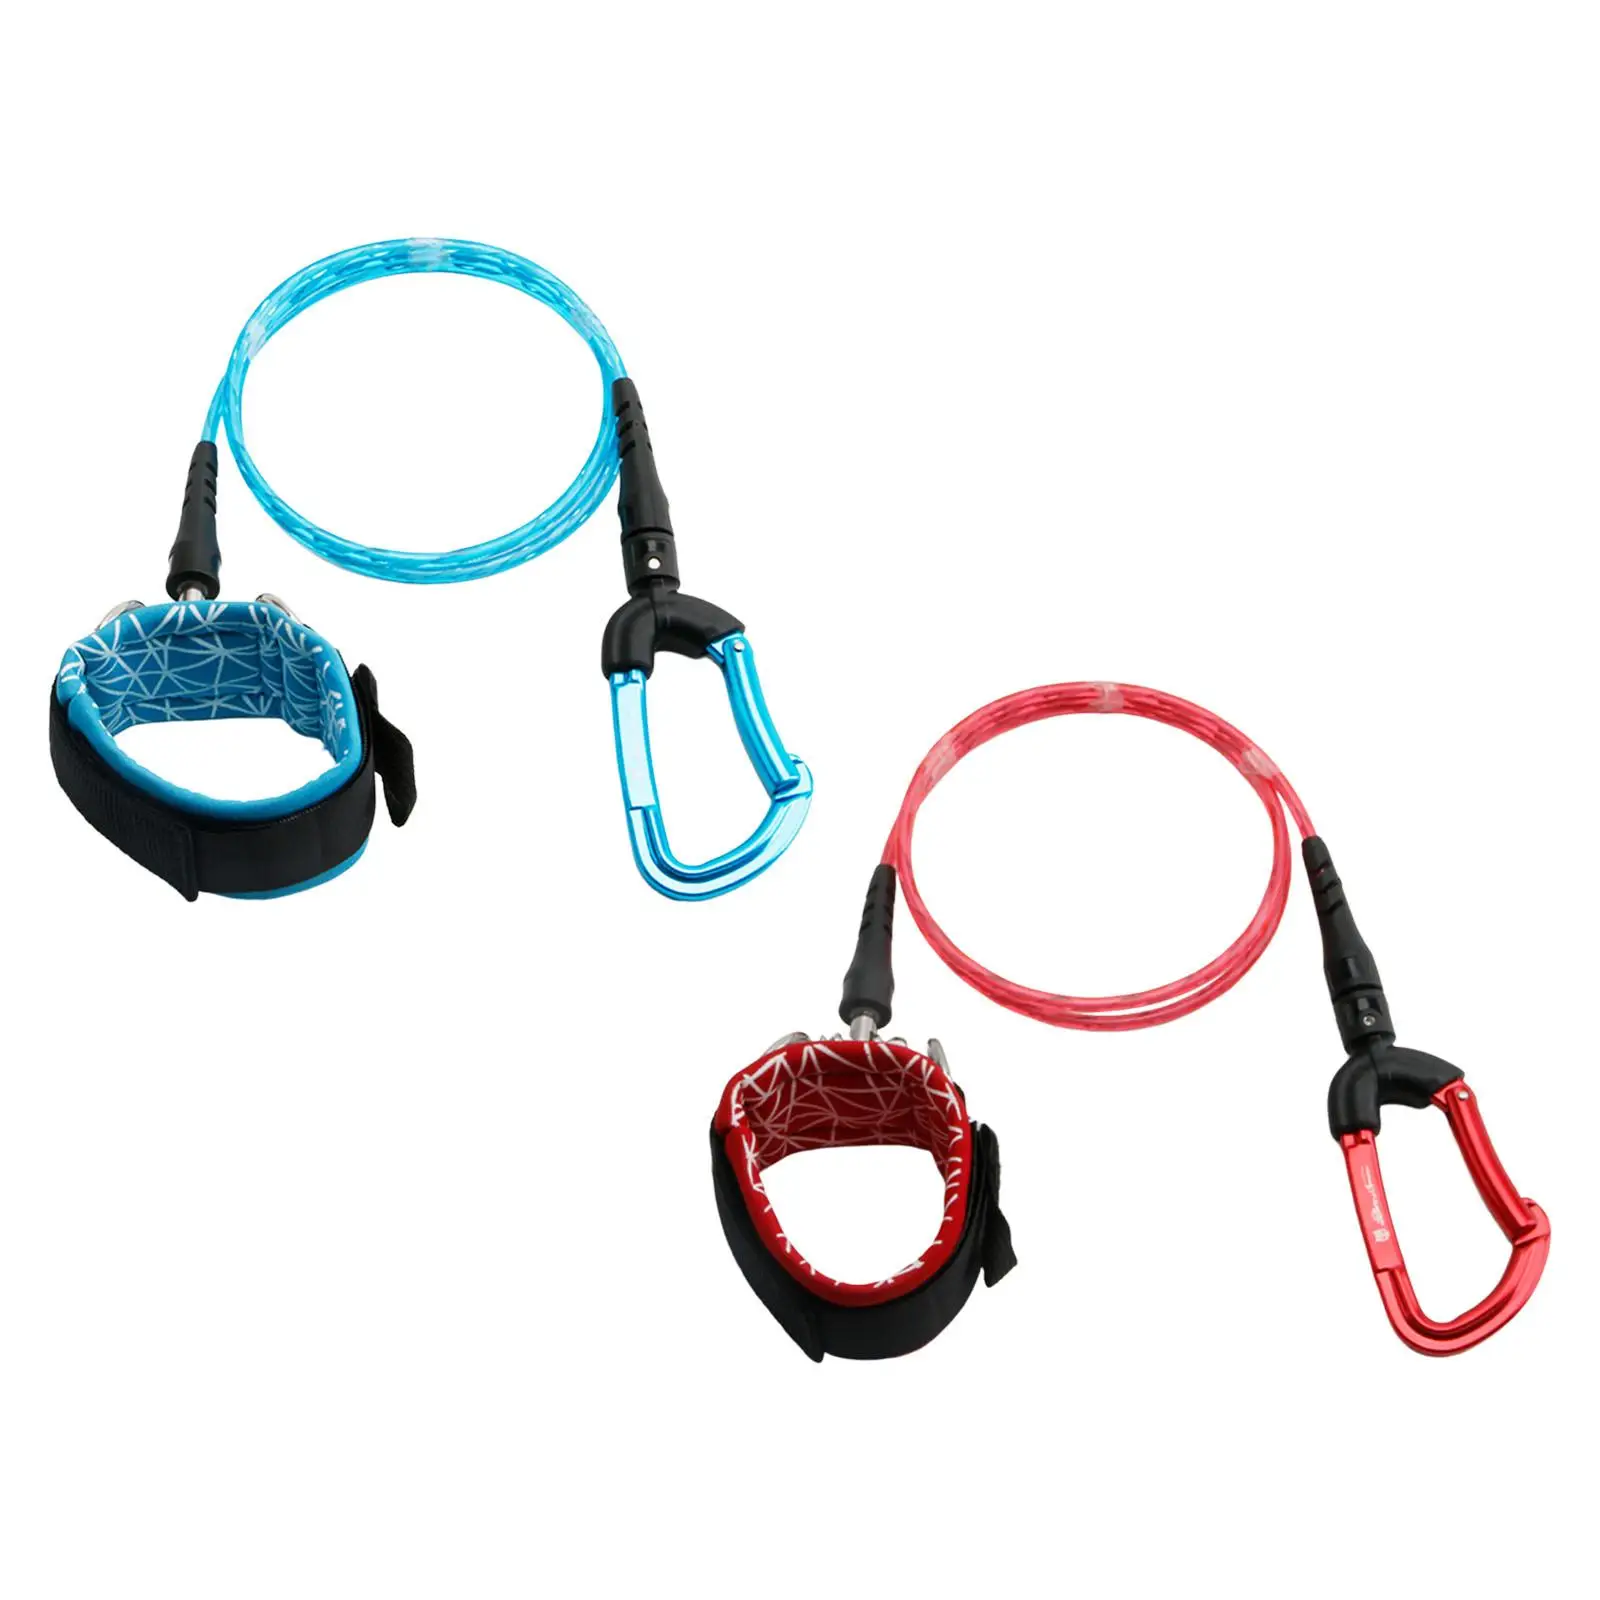 Freediving Lanyard Adjustable Professional Breaking kN Dive Wristband for Freediving